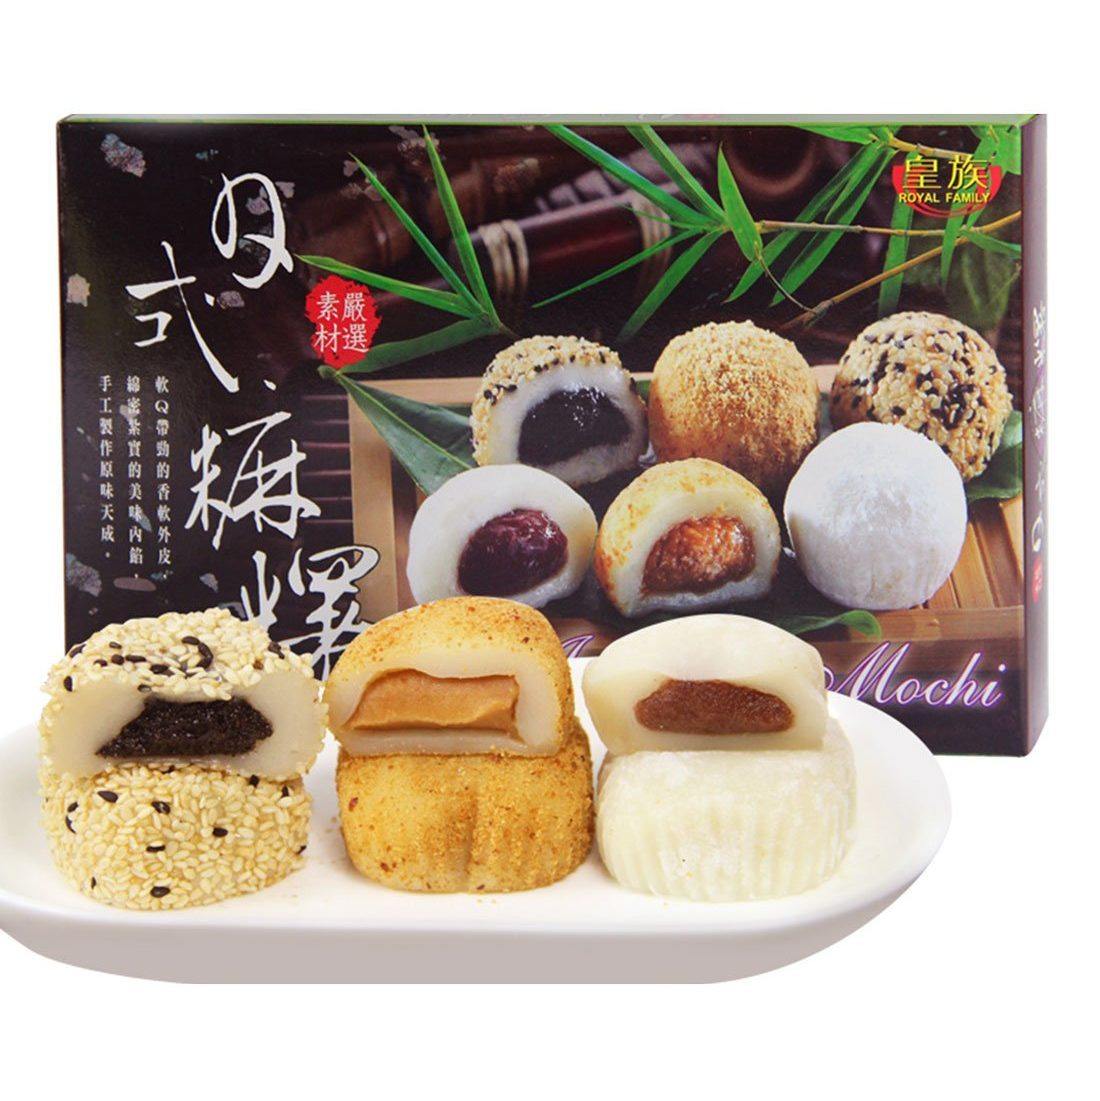 ROYAL FAMILY JAPANESE MIXED MOCHI 450 G - Premium Co  Groceries 